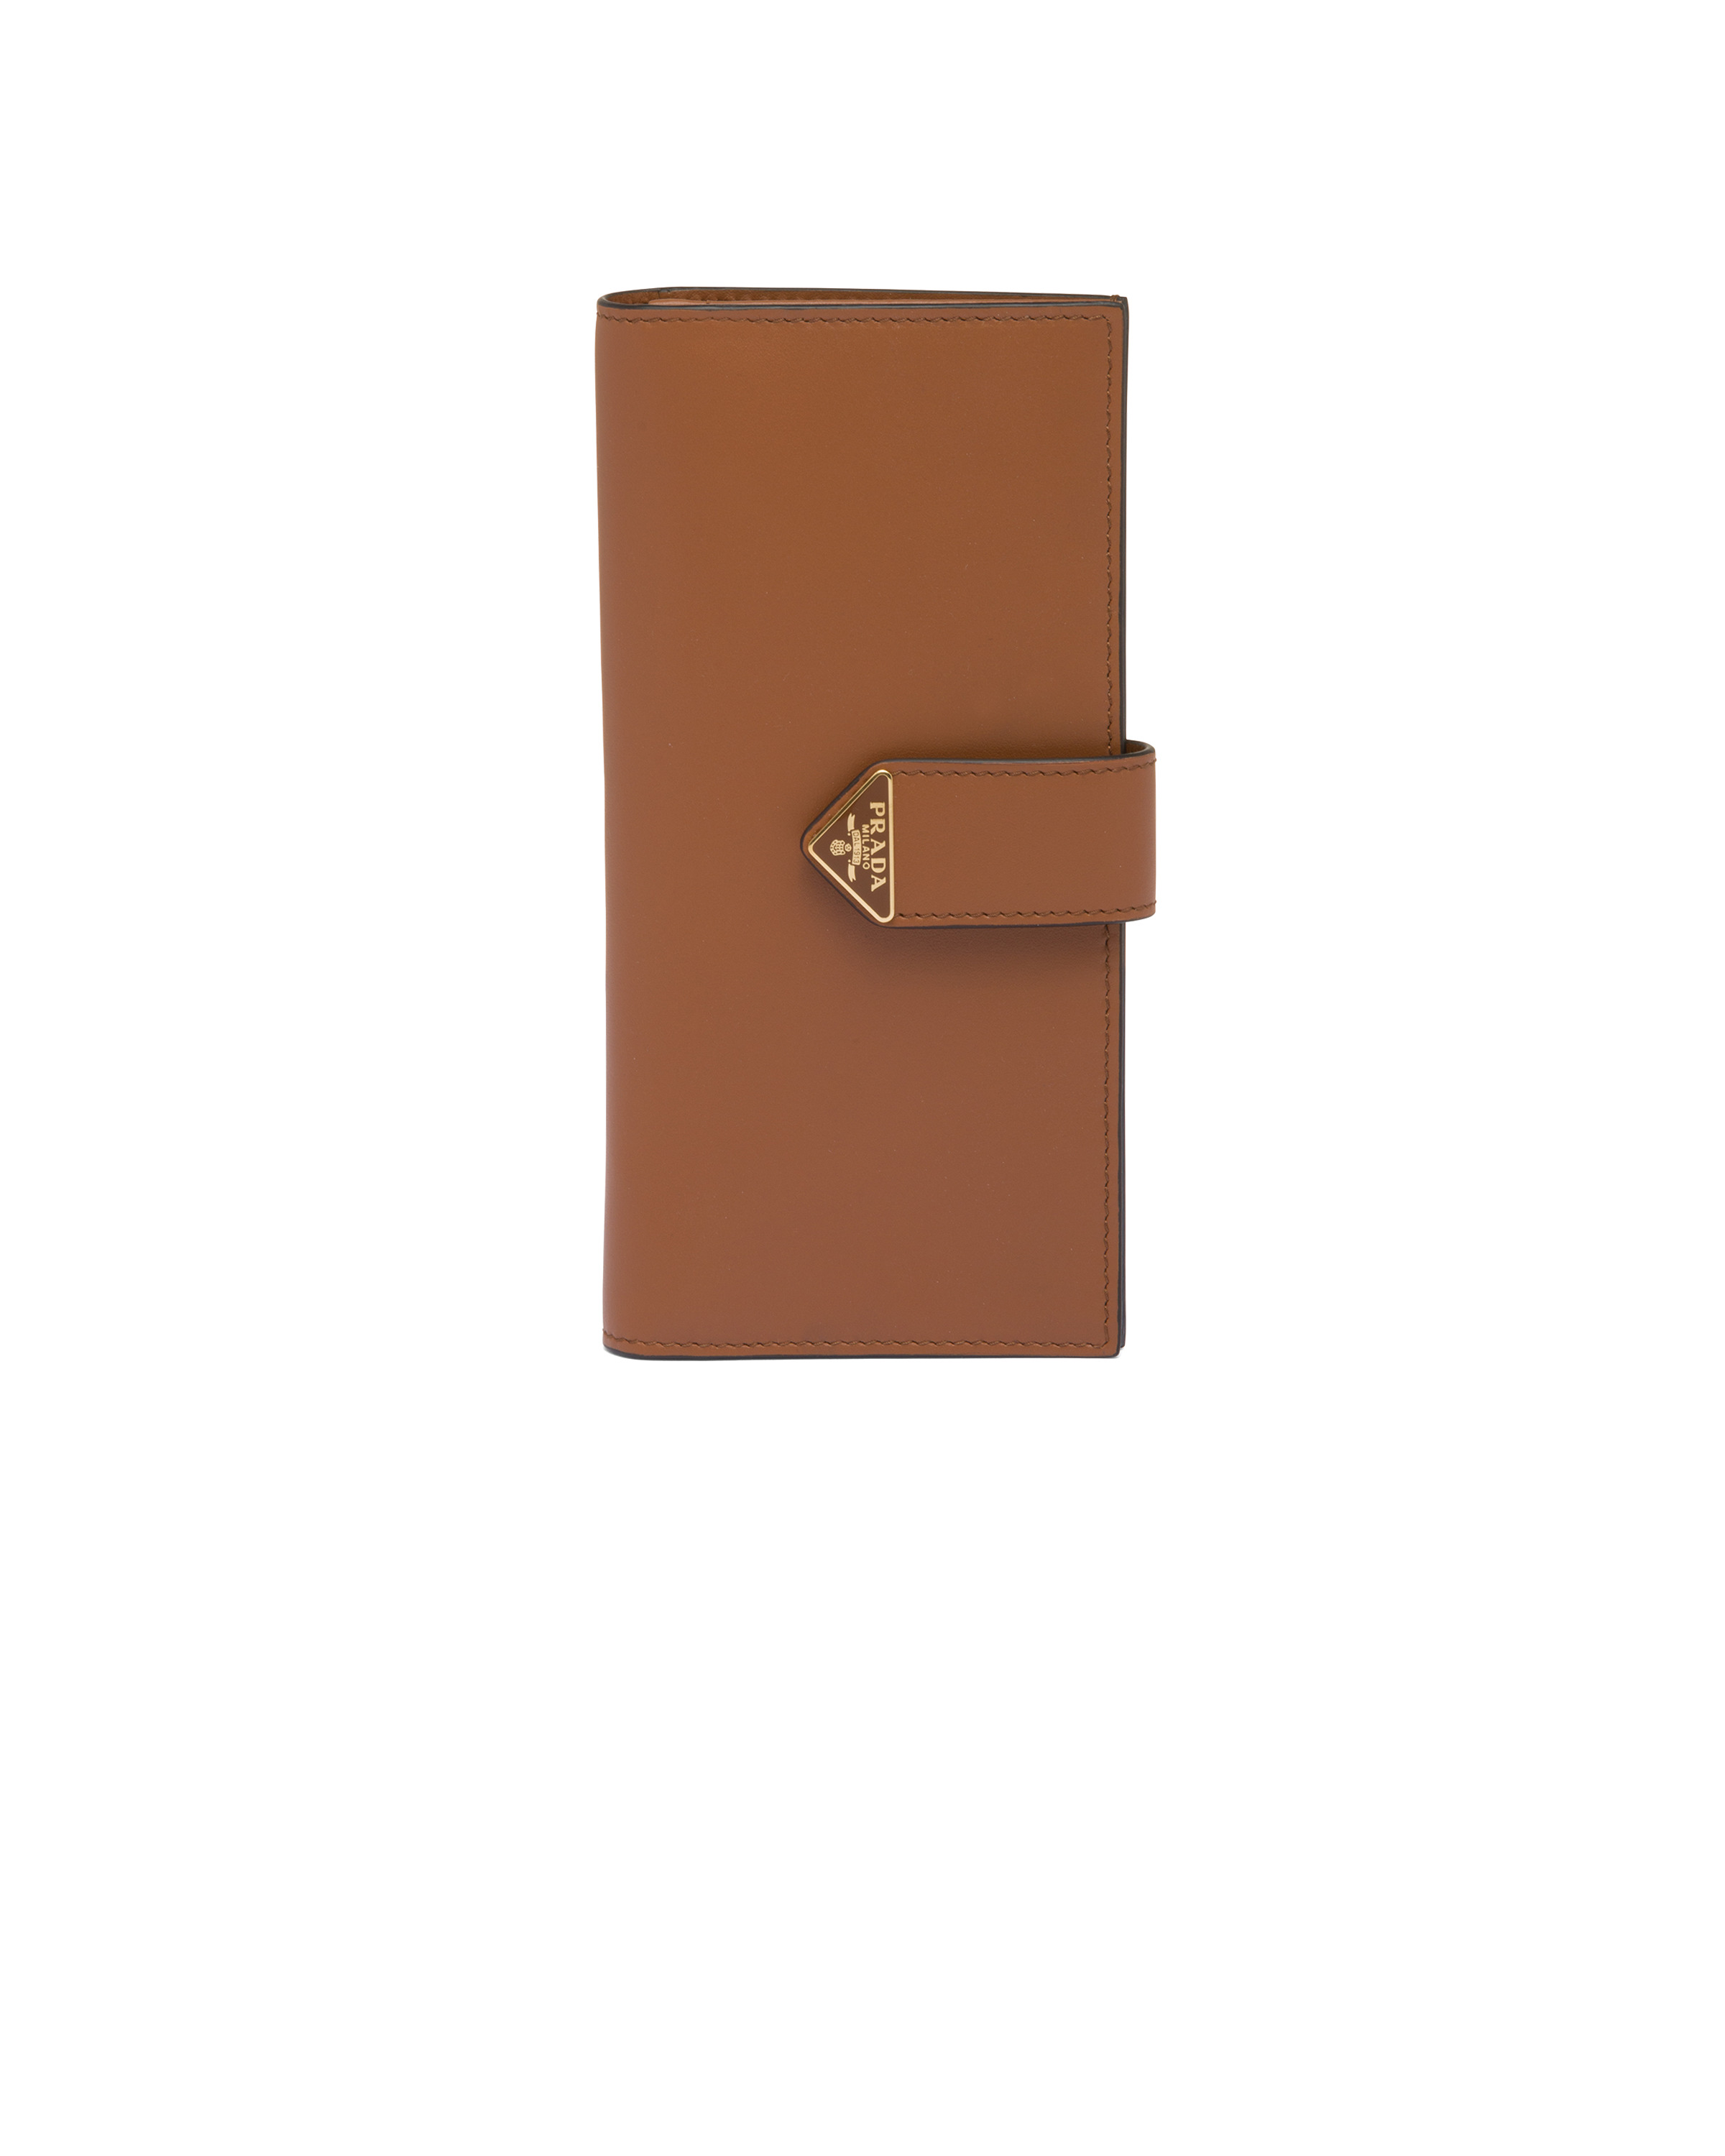 Large leather wallet - 1